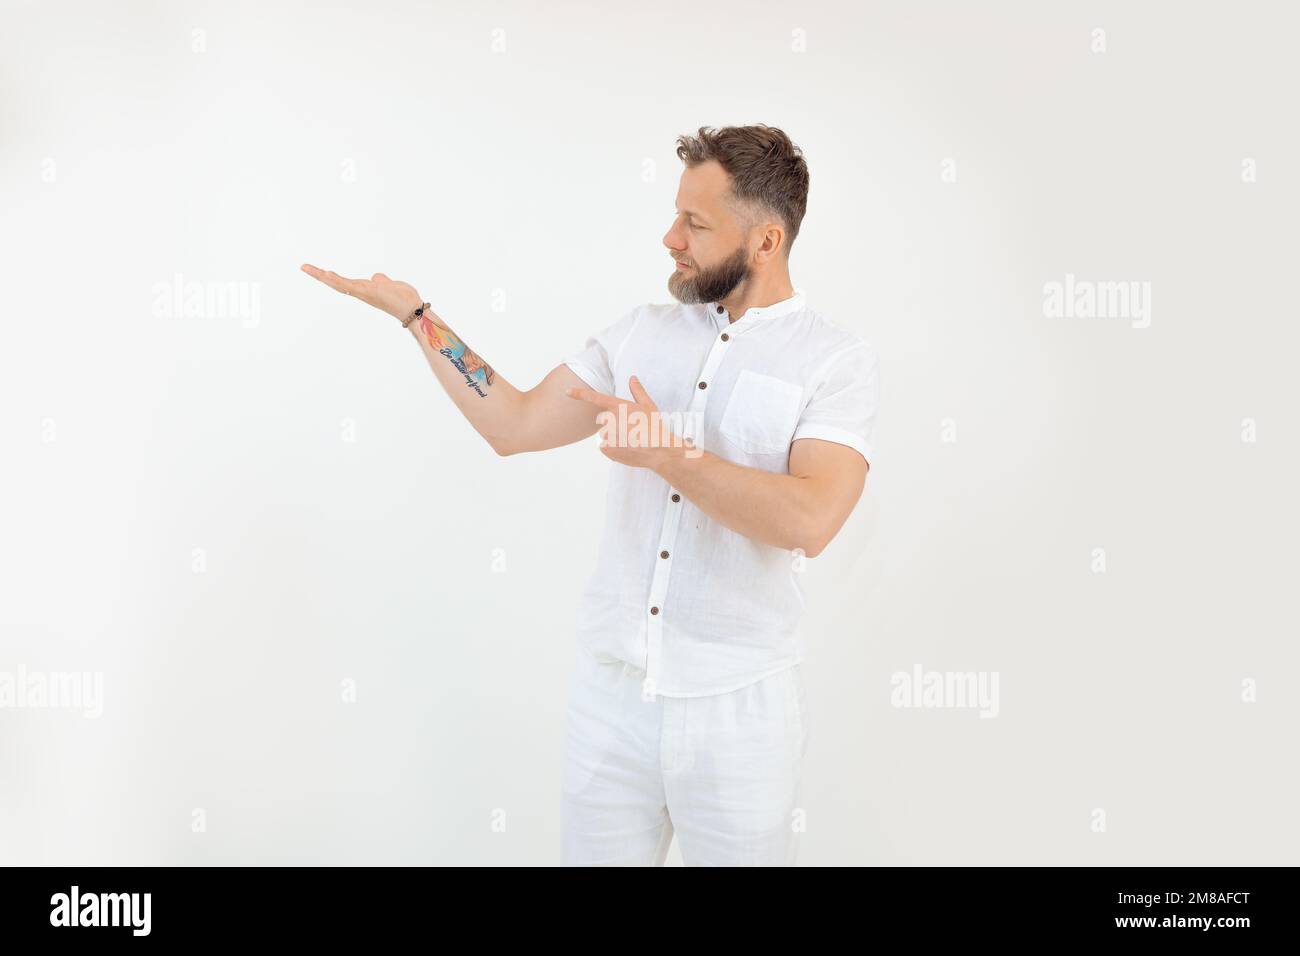 Sporty middle-aged bearded man standing, raising hand with open palm, pointing with forefinger on white background. Stock Photo